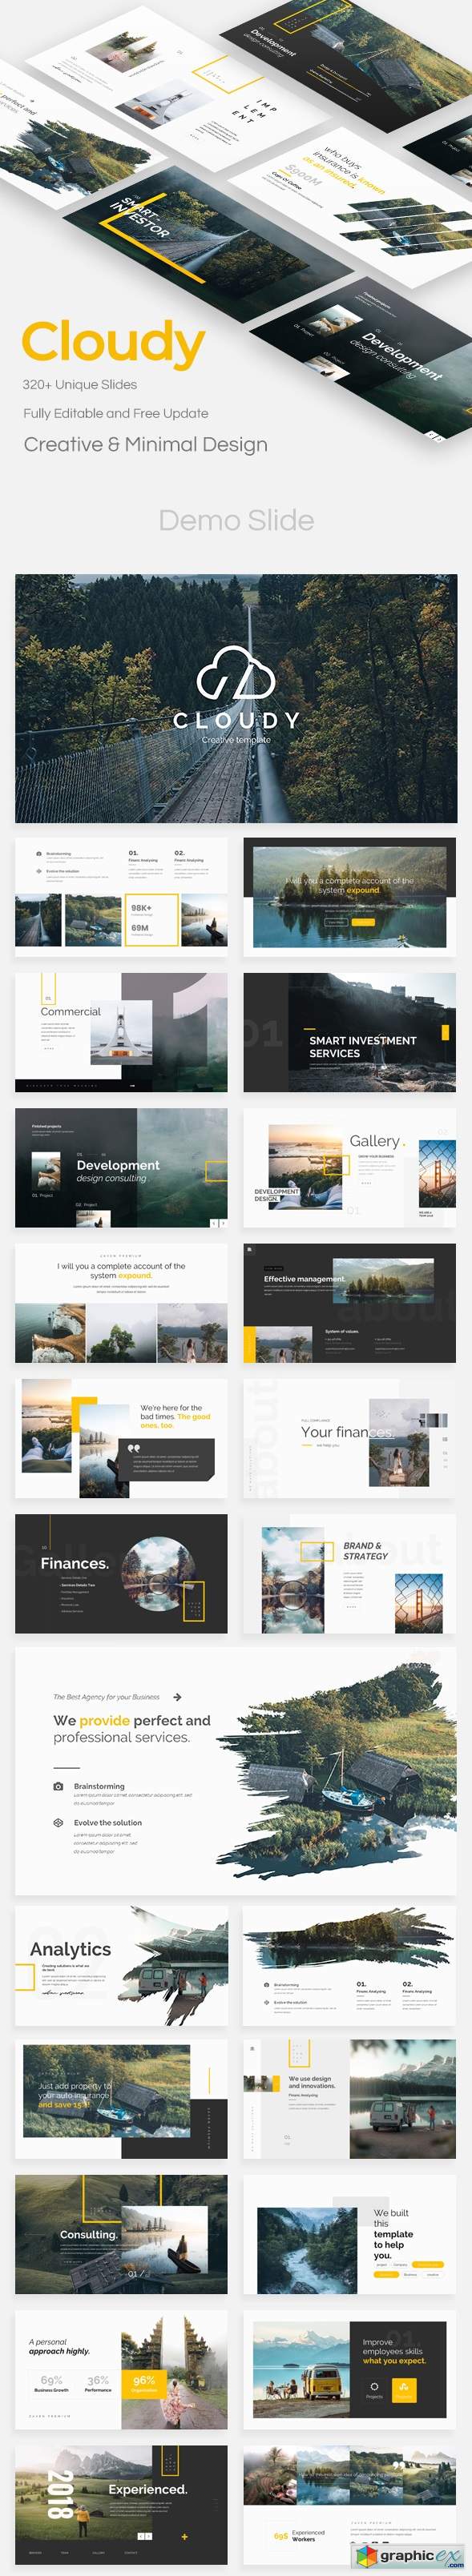 Cloudy Premium Powerpoint Template